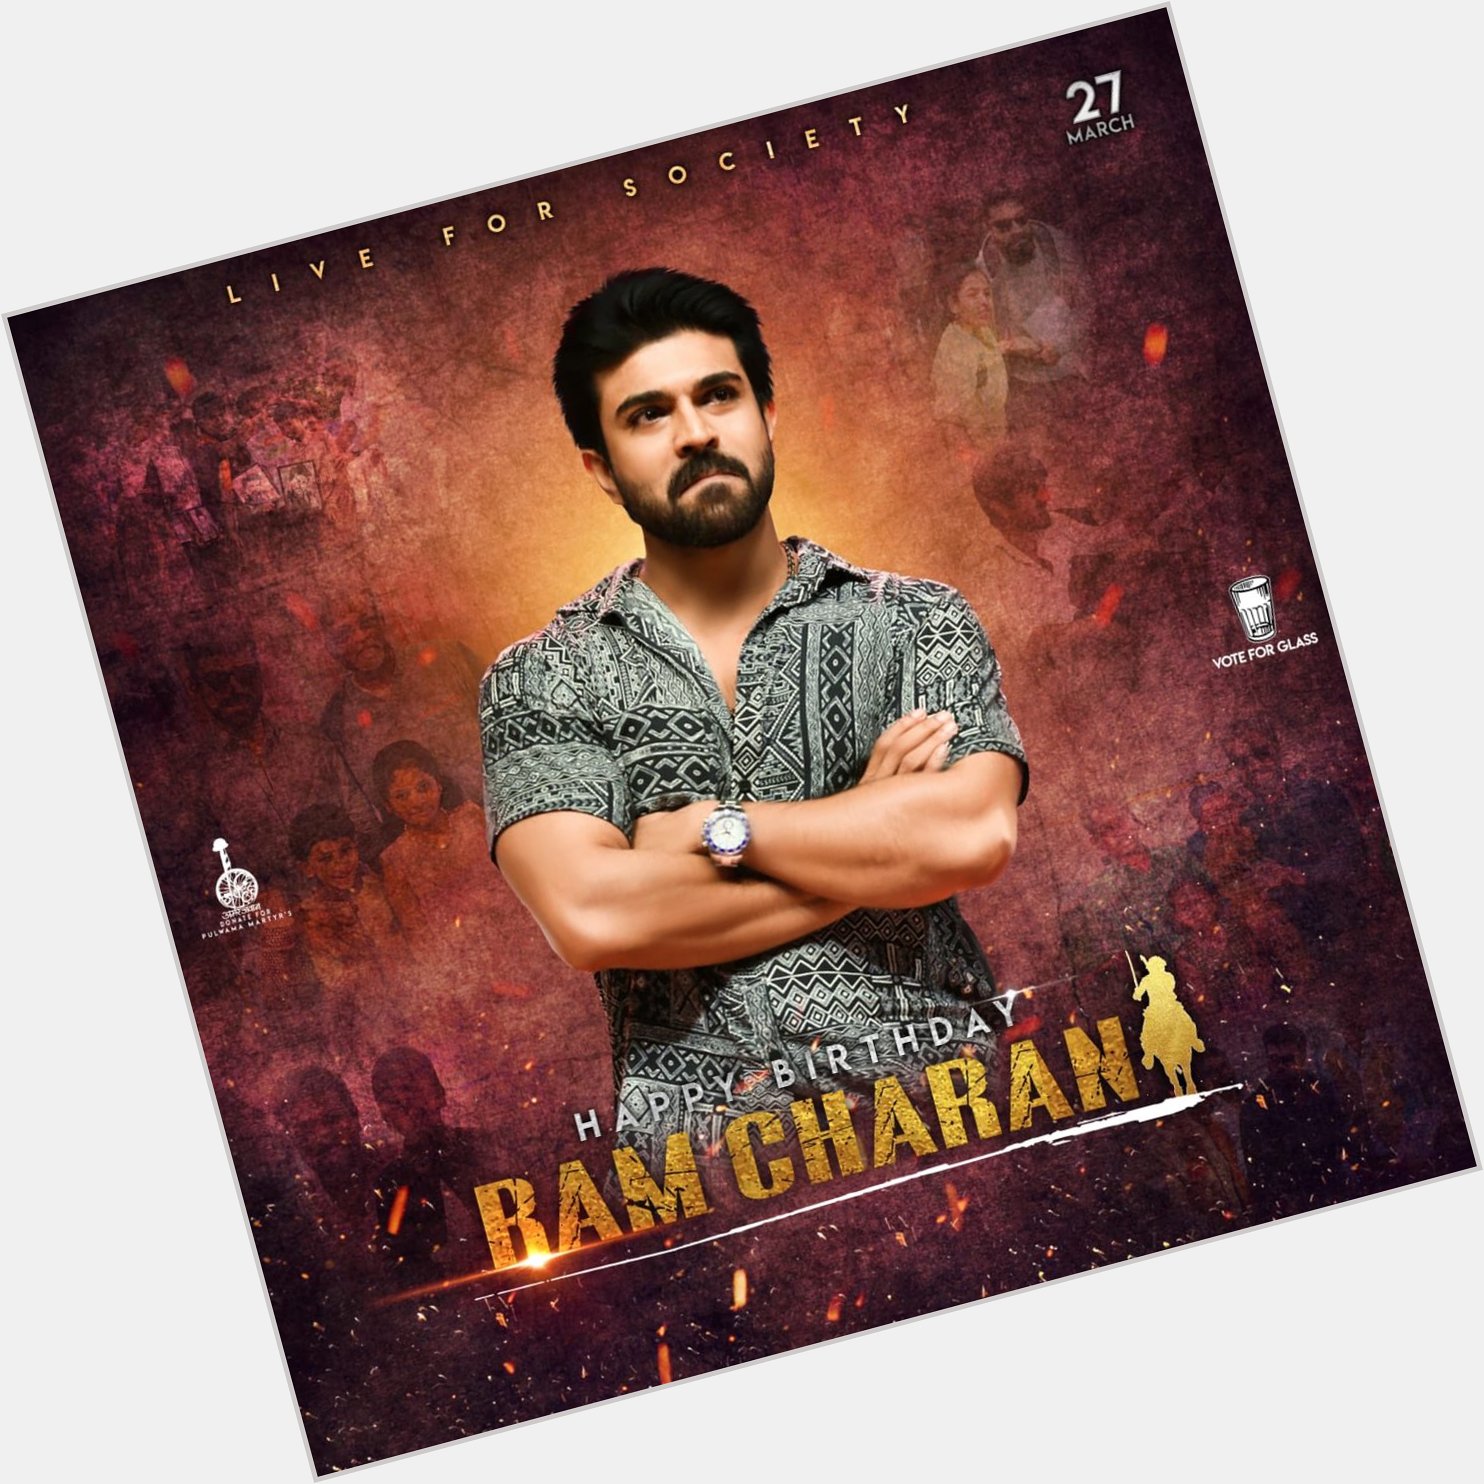 Unveiling the Common DP of  Advance Happy birthday charan  RAMCHARAN BDAY CDP 